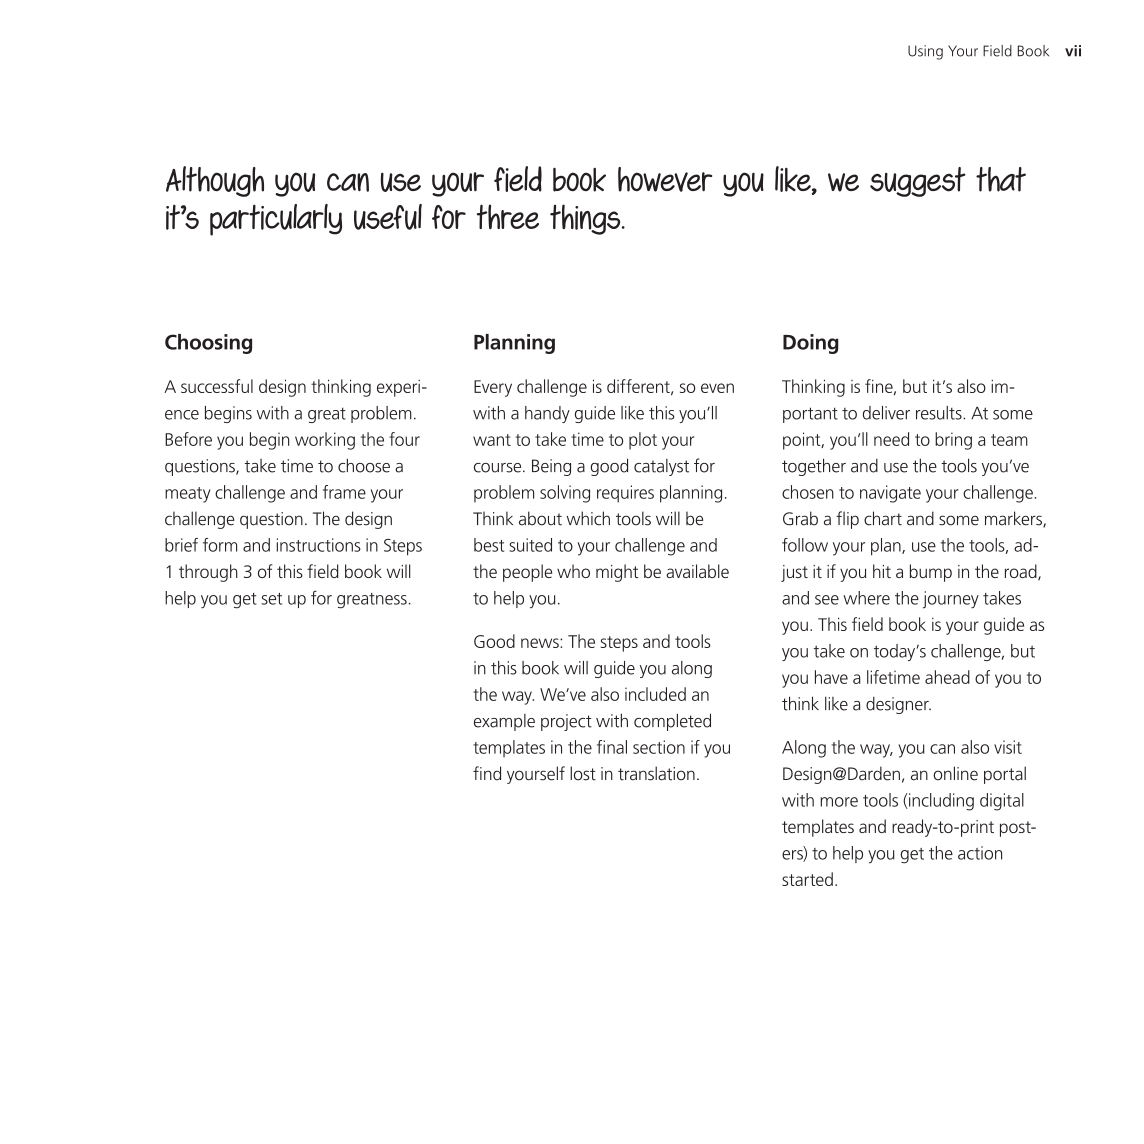 The Designing for Growth Field Book page vii